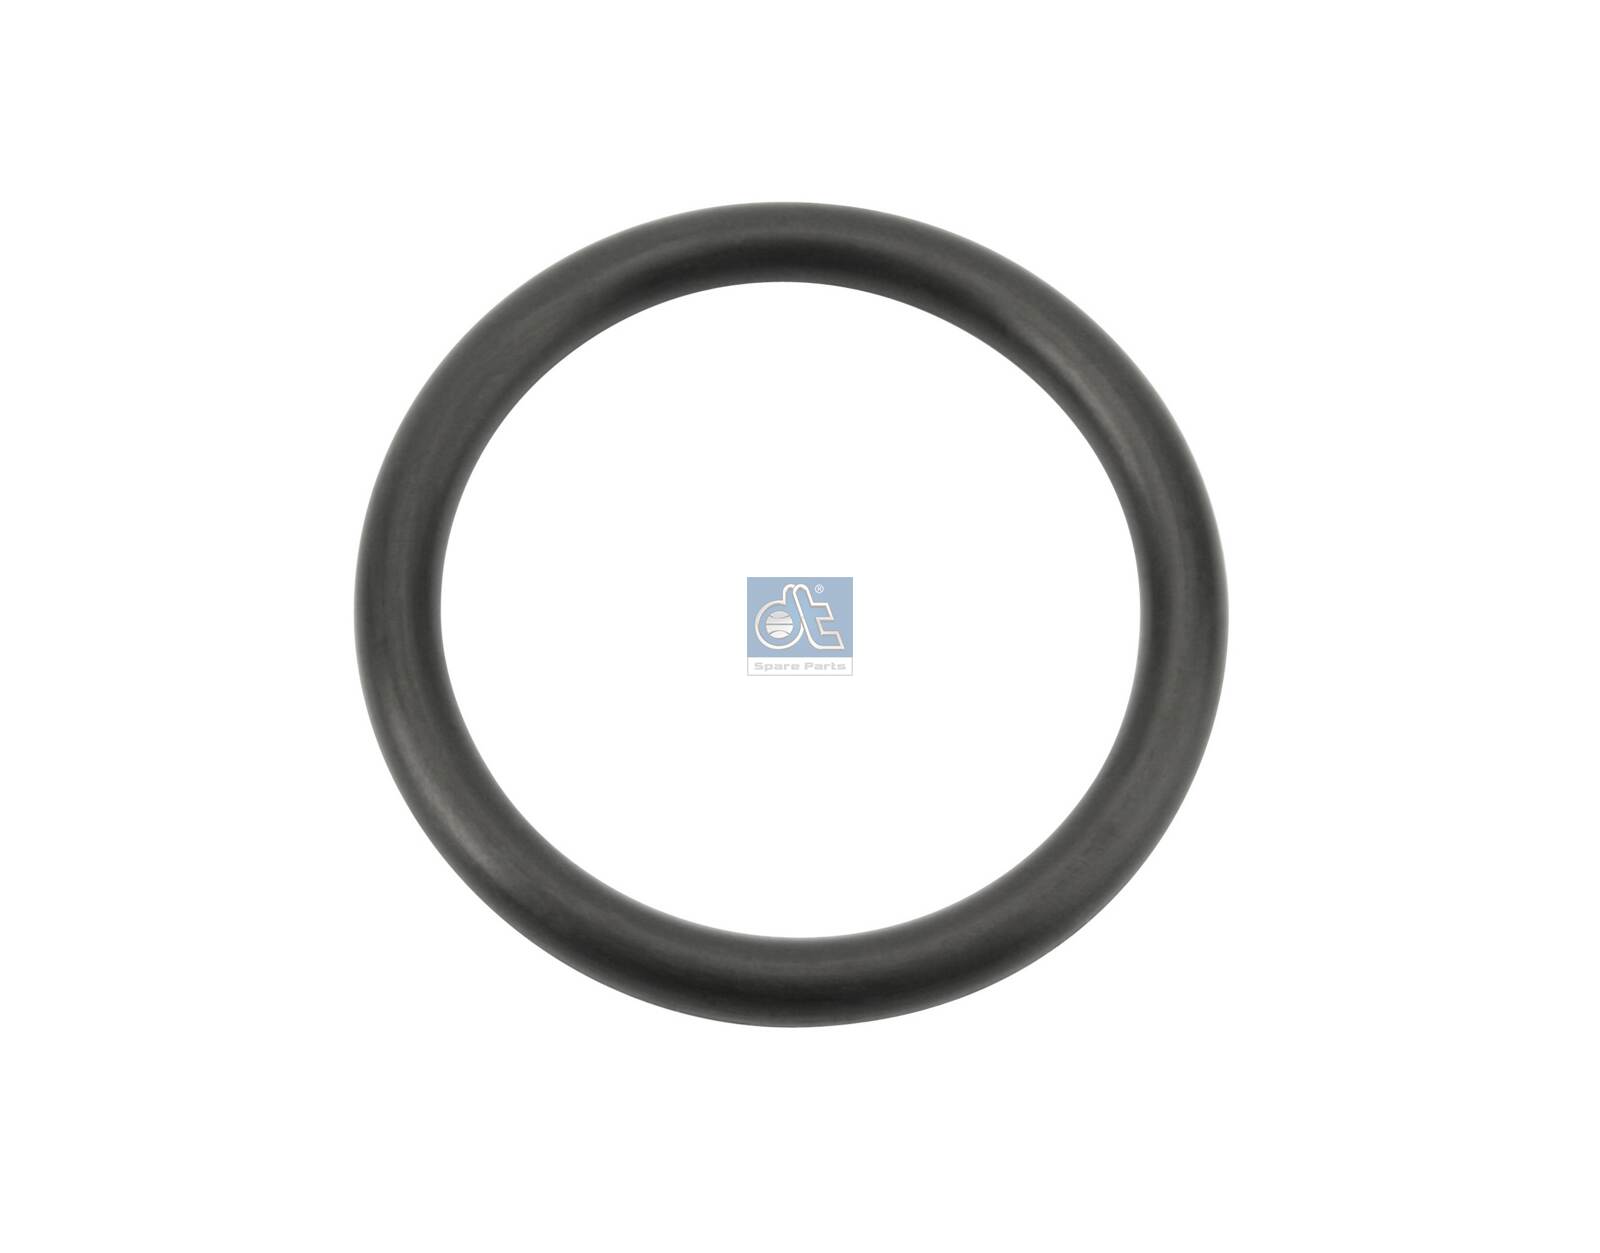 2.15914, Seal Ring, DT Spare Parts, 477059, 7400477059, 108085, 115.802, 44,5X5,7, 45369, 98204517, OR-059, 445X57, 70007, 82242